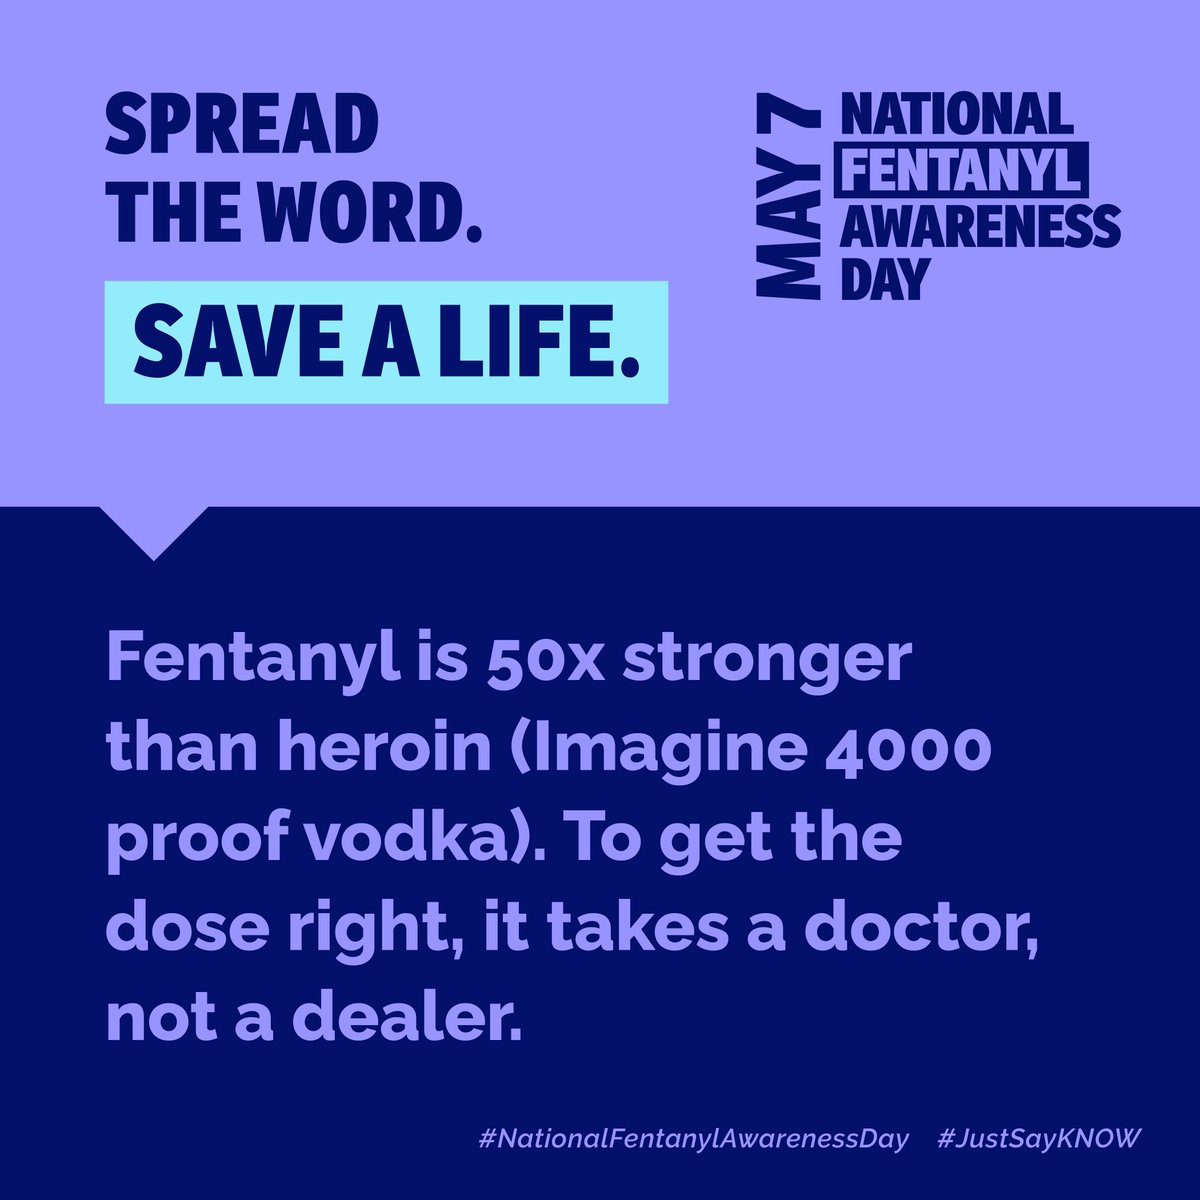 42% of American adults know someone who died from an overdose. This National Fentanyl Awareness Day, join our coalition and be part of the solution and save a life by visiting fentanylawarenessday.org. 

#NationalFentanylAwarenessDay #JustSayKNOW #NoRandomPills